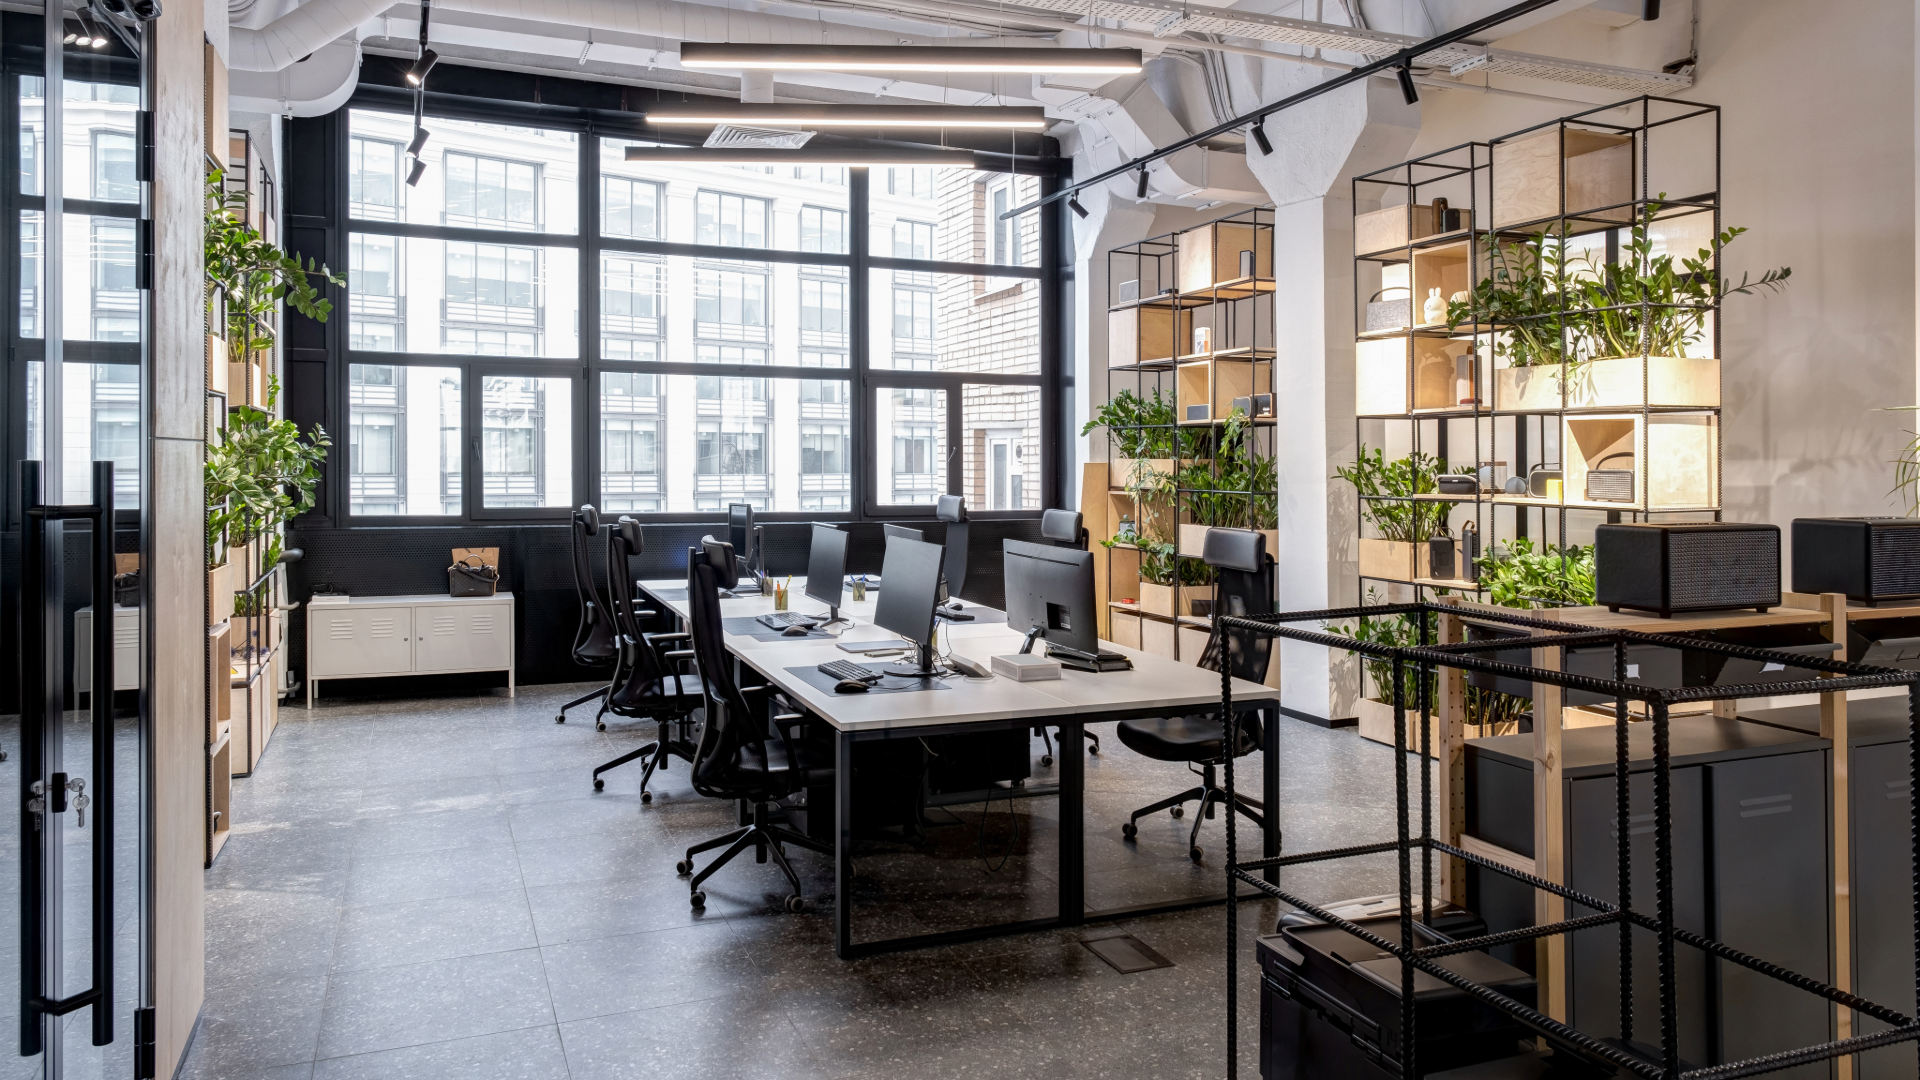 CREATING A HEALTHY WORKPLACE: WELLNESS CONSIDERATIONS FOR PHOENIX OFFICES